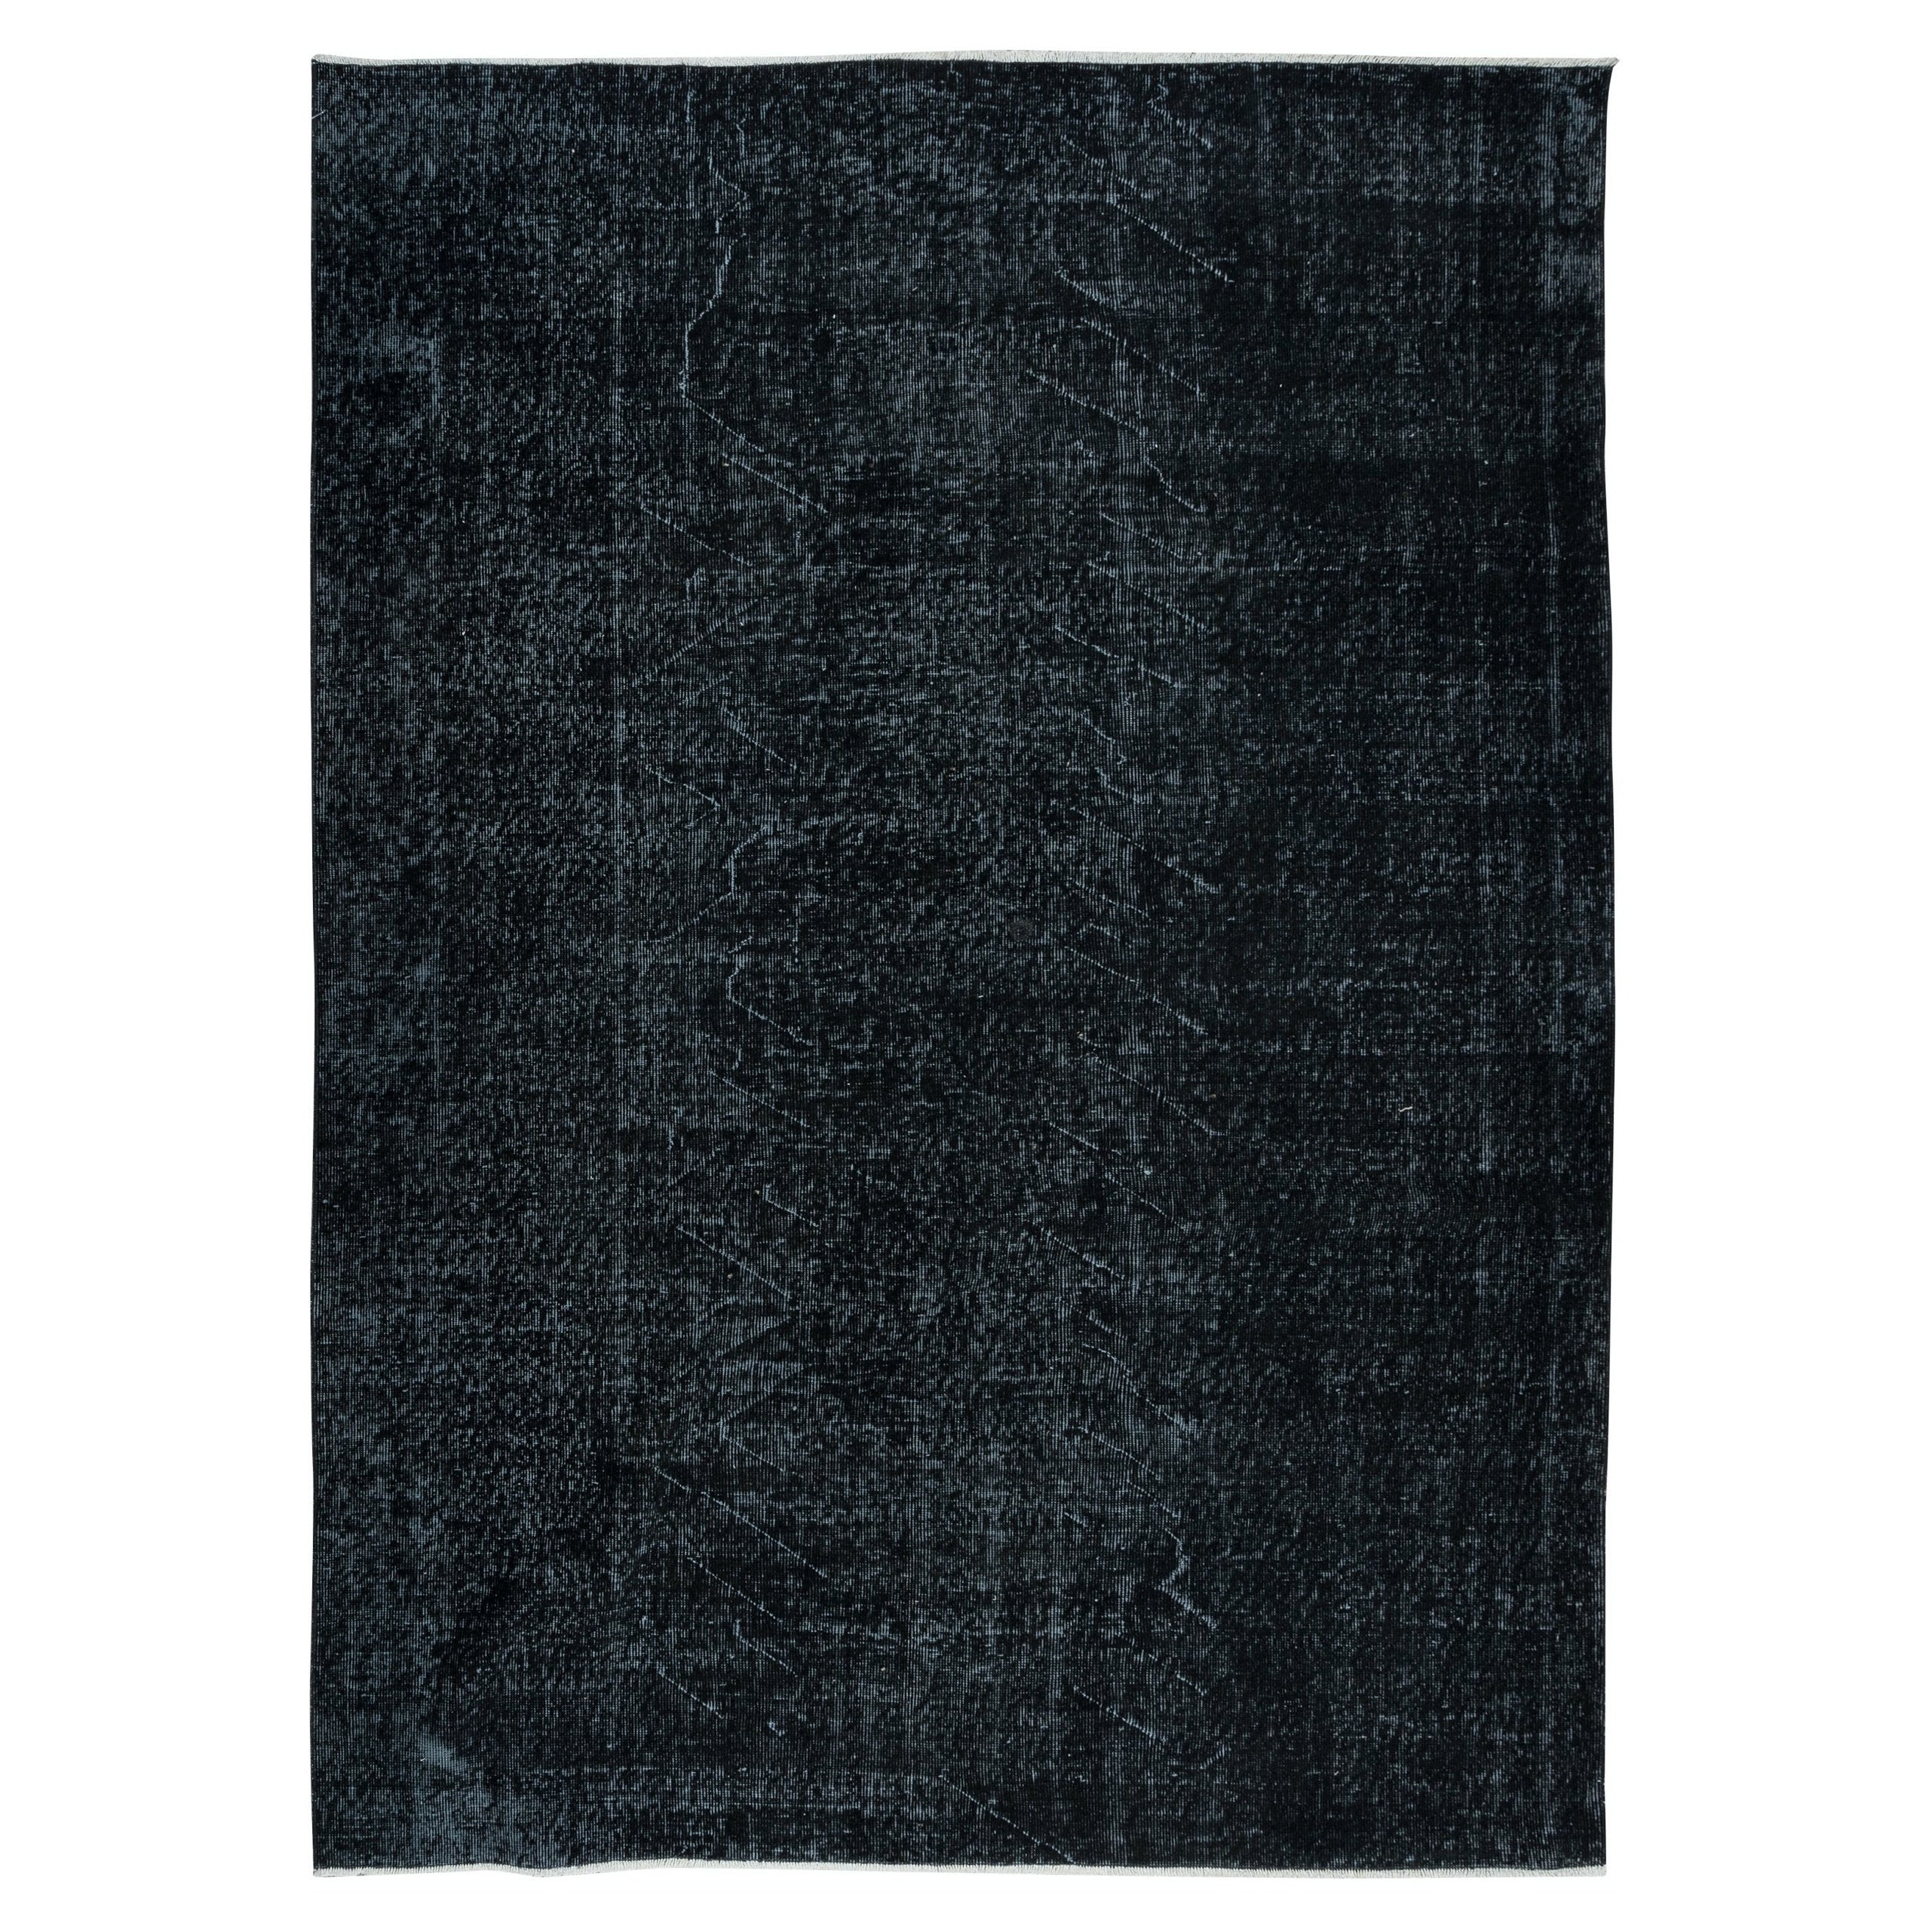 6.4x9 Ft Plain Black Area Rug, Handknotted and Handwoven in Isparta, Turkey For Sale